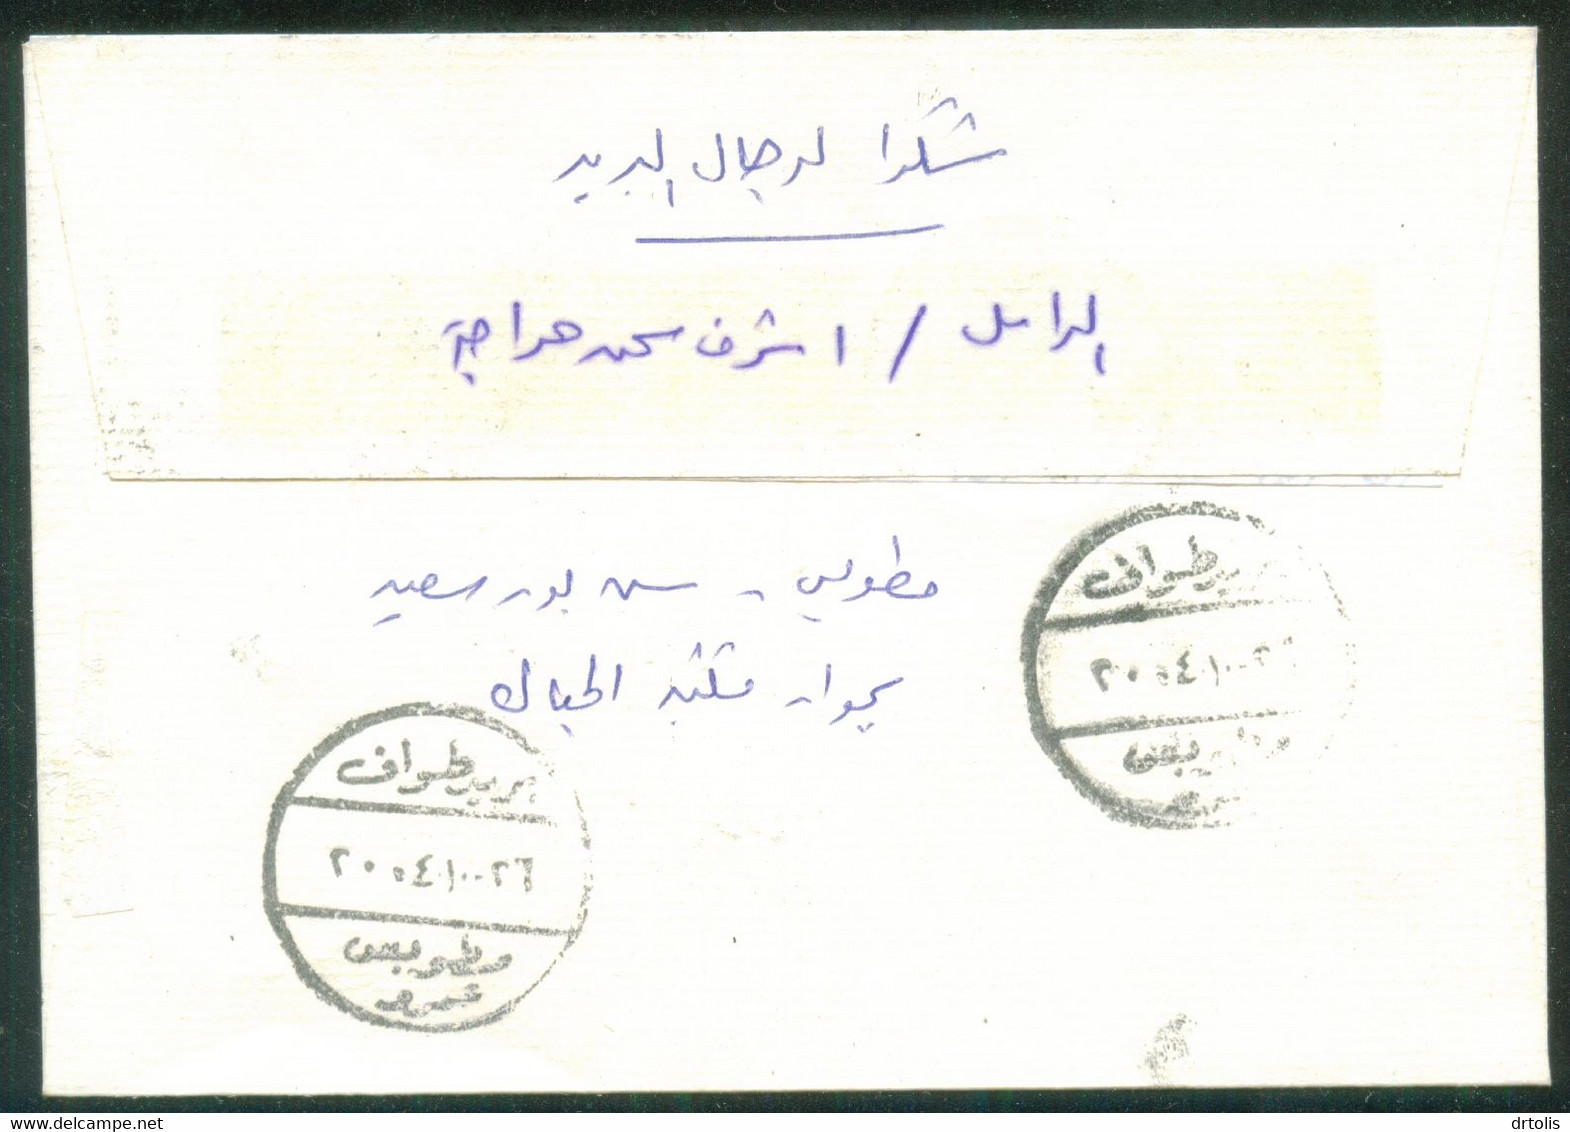 EGYPT / 2004 / THE WITHDRAWN TELECOM STAMP ON COVER WITH A VERY RARE (TAWAF) CANCELLATION. - Lettres & Documents